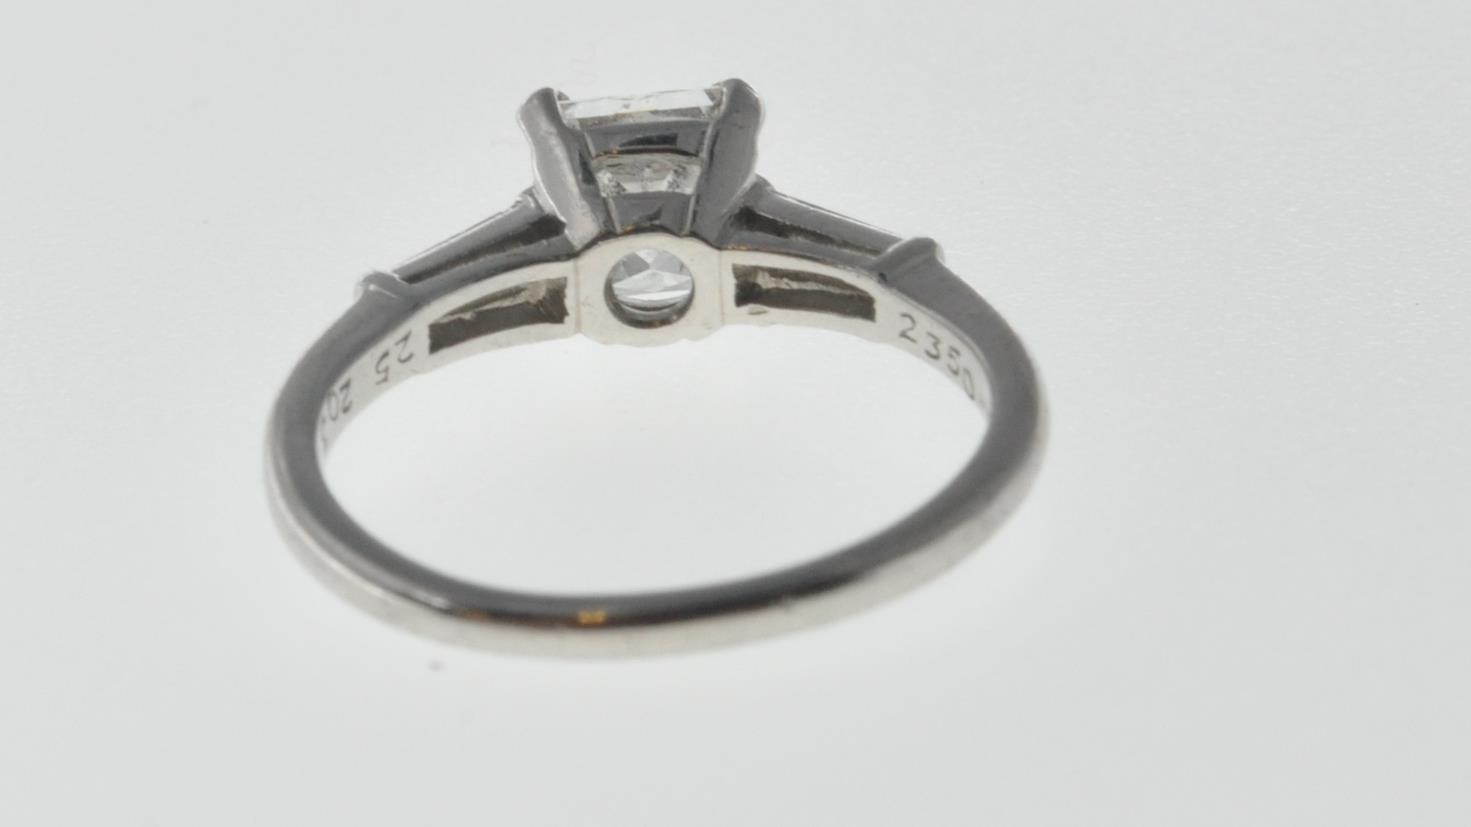 PLATINUM AND DIAMOND SOLITAIRE RING - Image 5 of 7